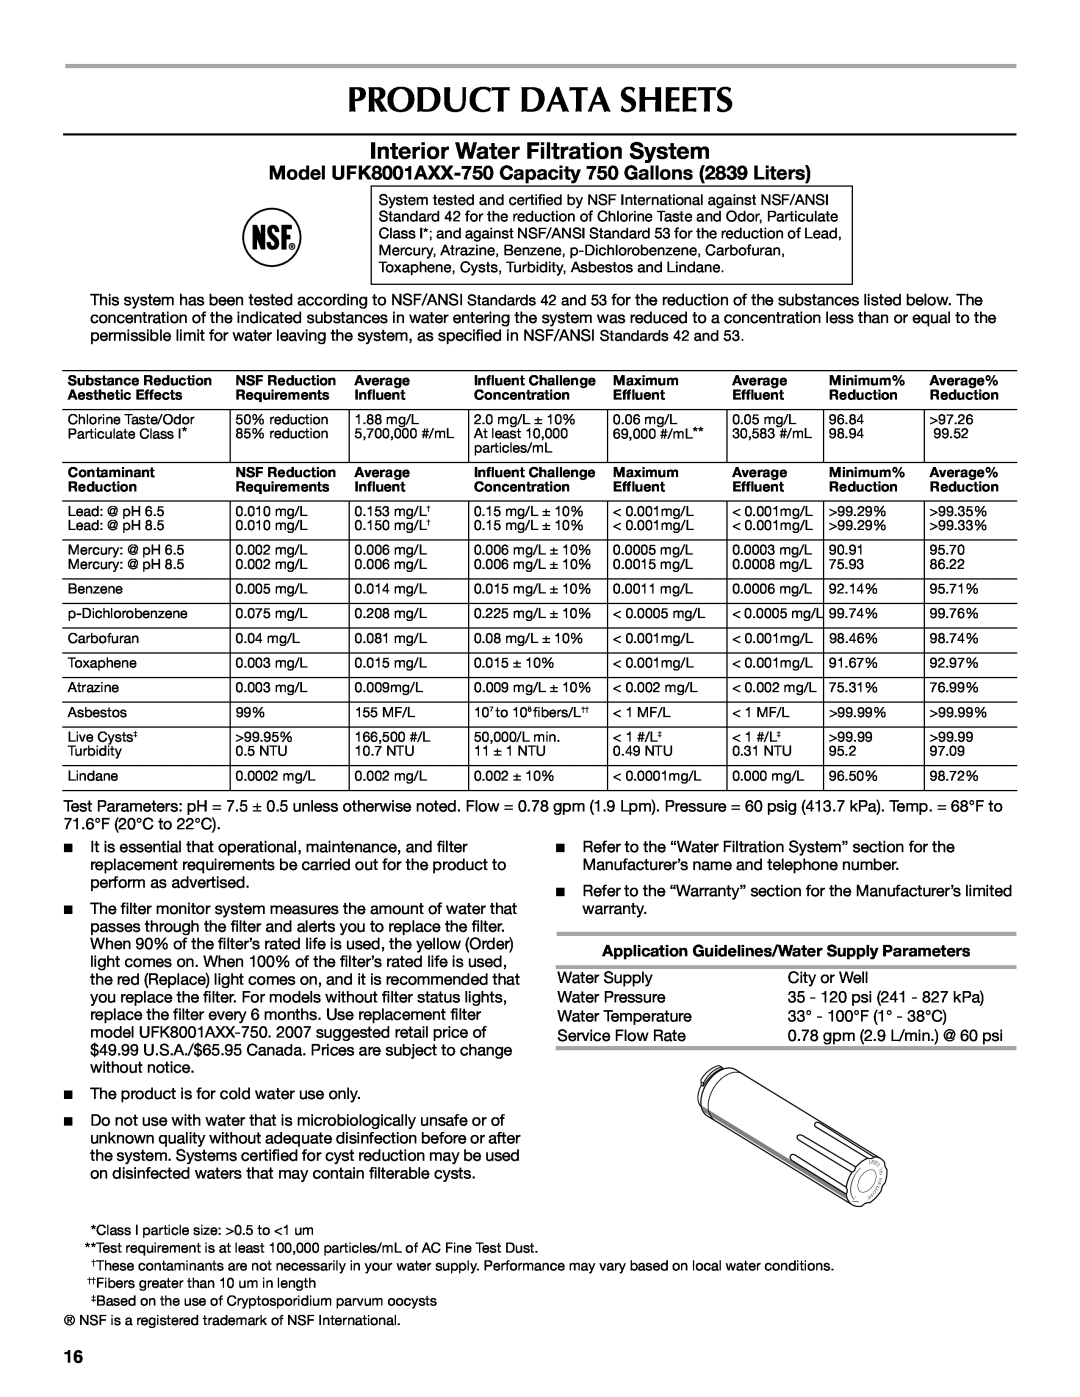 Maytag W10175477A, W10175444A, MFI2568AES installation instructions Product Data Sheets, Interior Water Filtration System 